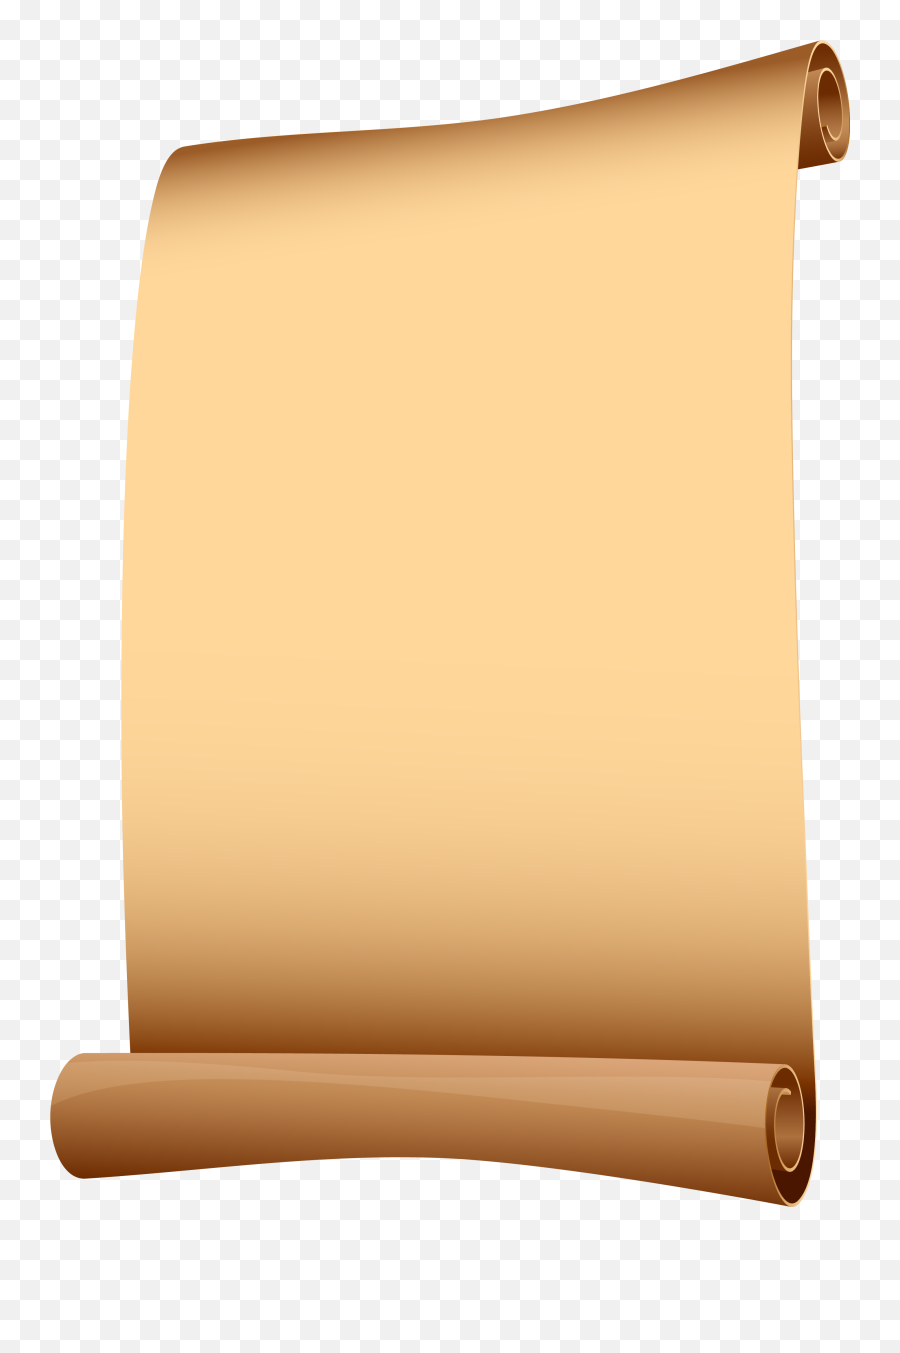 Paper Scroll Computer File - Chinese Wind Vector Scroll Png Transparent Background Scroll Paper Png Emoji,Scroll Clipart